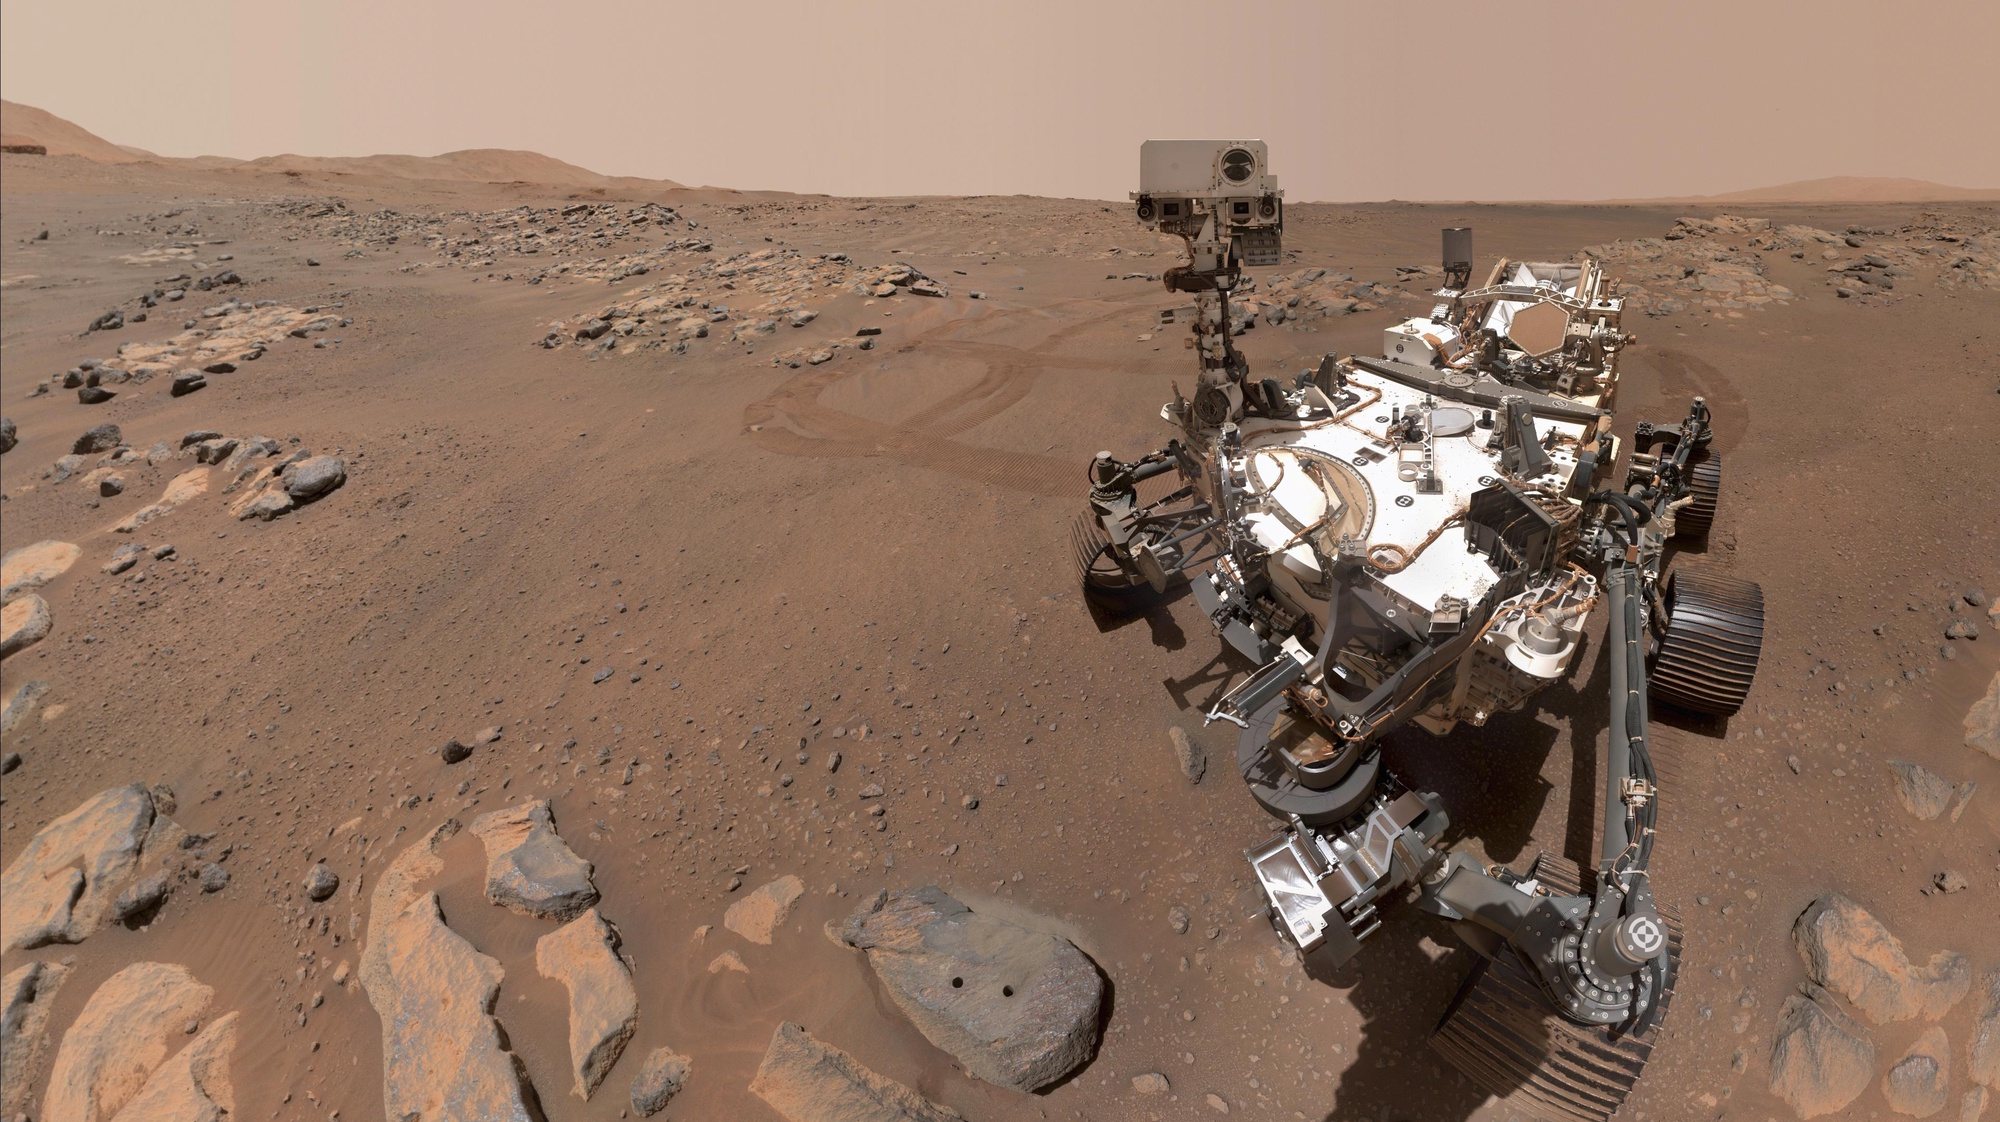 epa09486865 A handout picture made available by the National Aeronautics and Space Administration (NASA) shows NASA&#039;s Perseverance Mars rover taking a selfie over a rock nicknamed &#039;Rochette&#039; (C, bottom) on 10 September 2021, the 198th Martian day, or sol of the mission (issued 25 September 2021). Two holes can be seen where the rover used its robotic arm to drill rock core samples. This image is made up of 57 individual images that are sent back down to Earth and stitched into the resulting selfies.  EPA/NASA/JPL-Caltech/MSSS HANDOUT  HANDOUT EDITORIAL USE ONLY/NO SALES